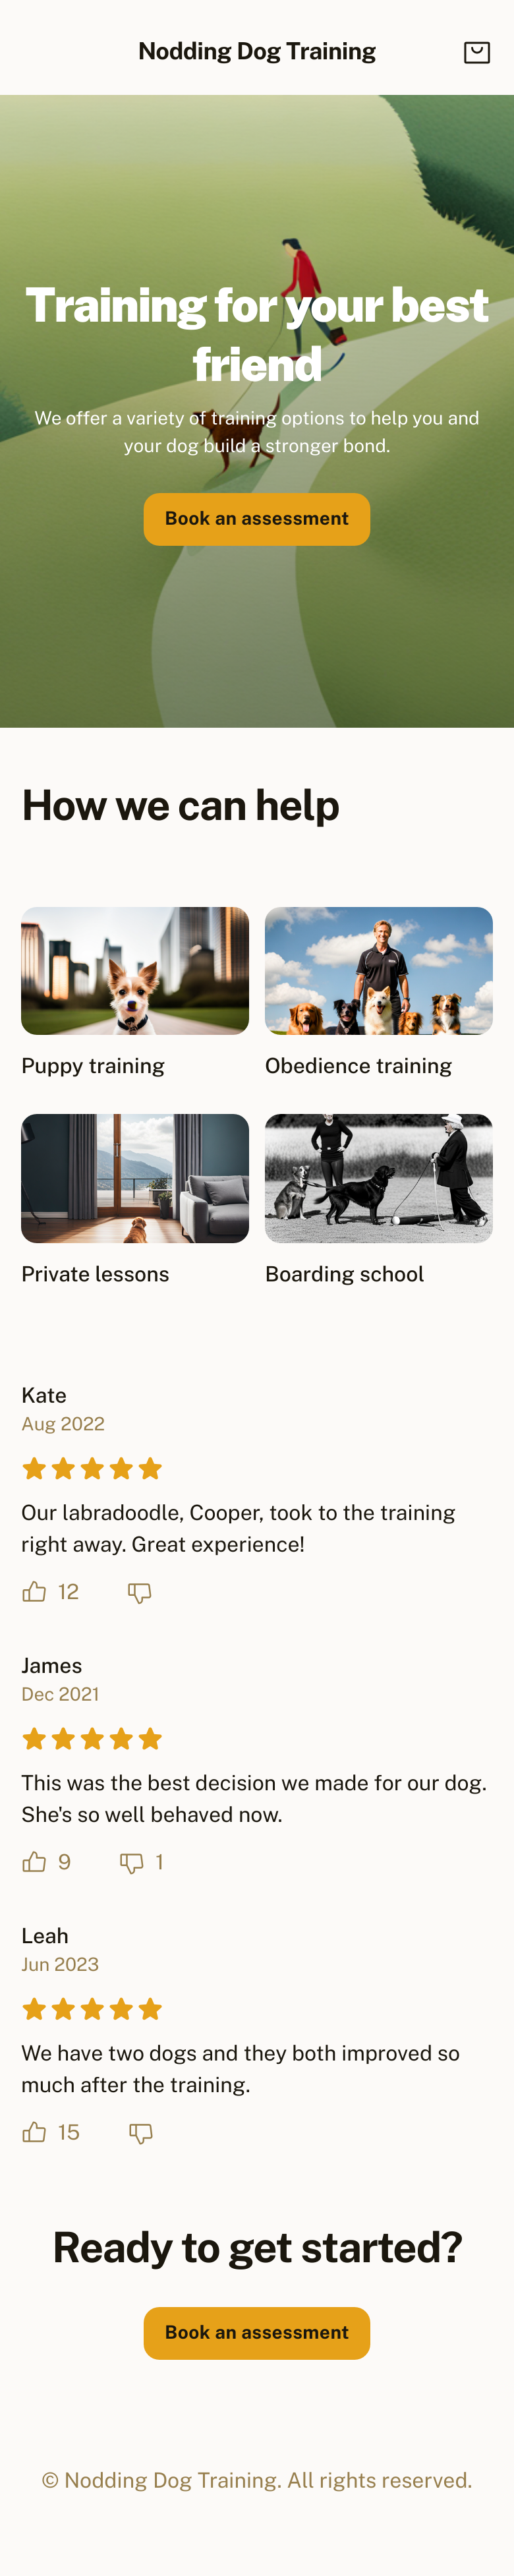 A website for Nodding Dog Training. The vibe is simple, retro but minimal, with a clear journey for the user as the come to the front page to bring them to the initial assessment booking button.